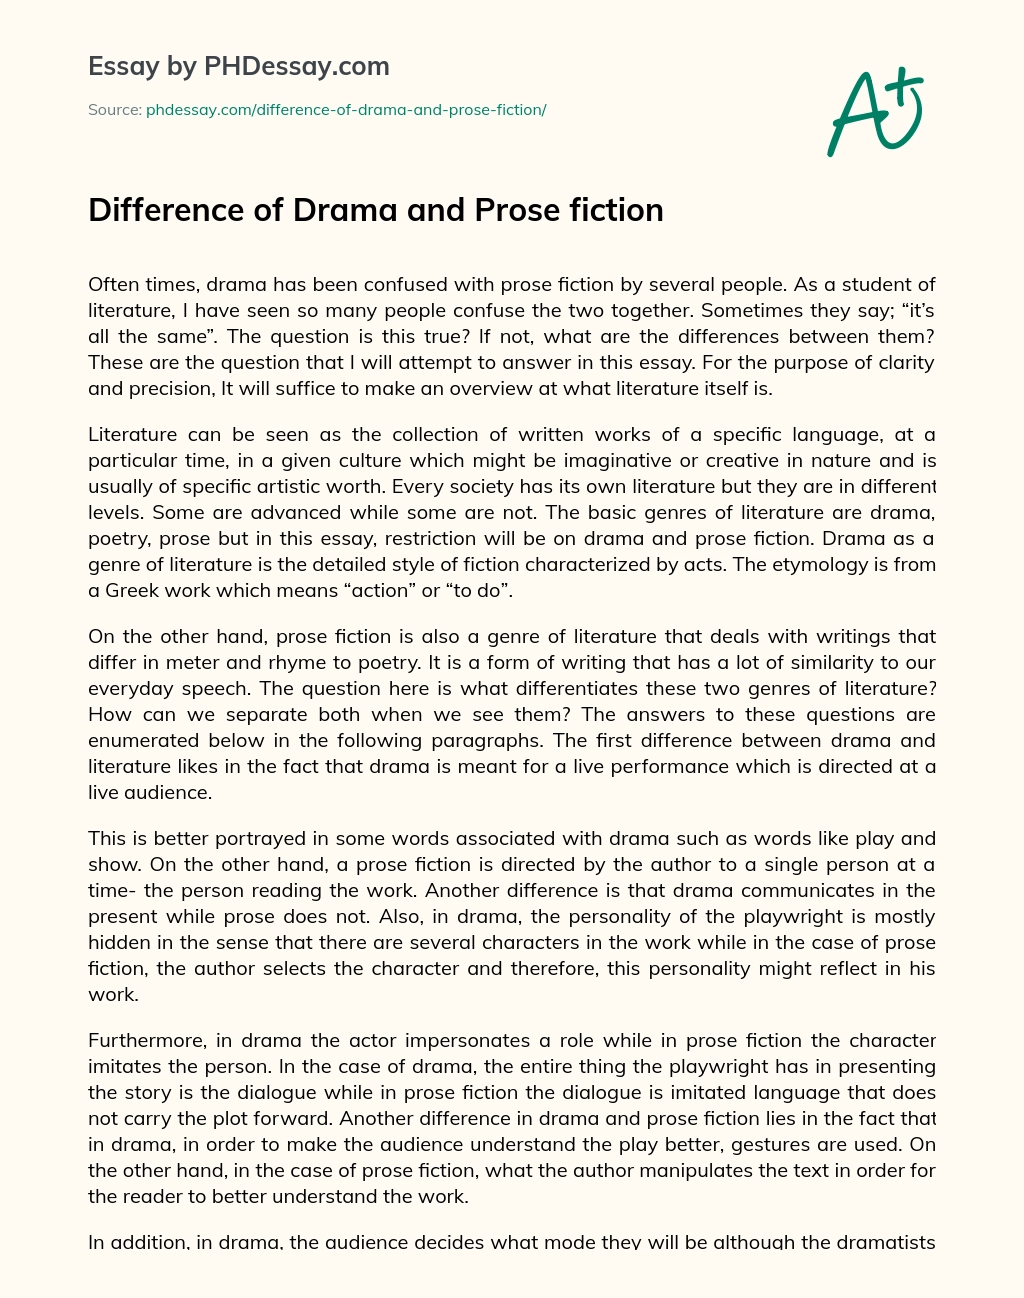 Difference of Drama and Prose fiction essay